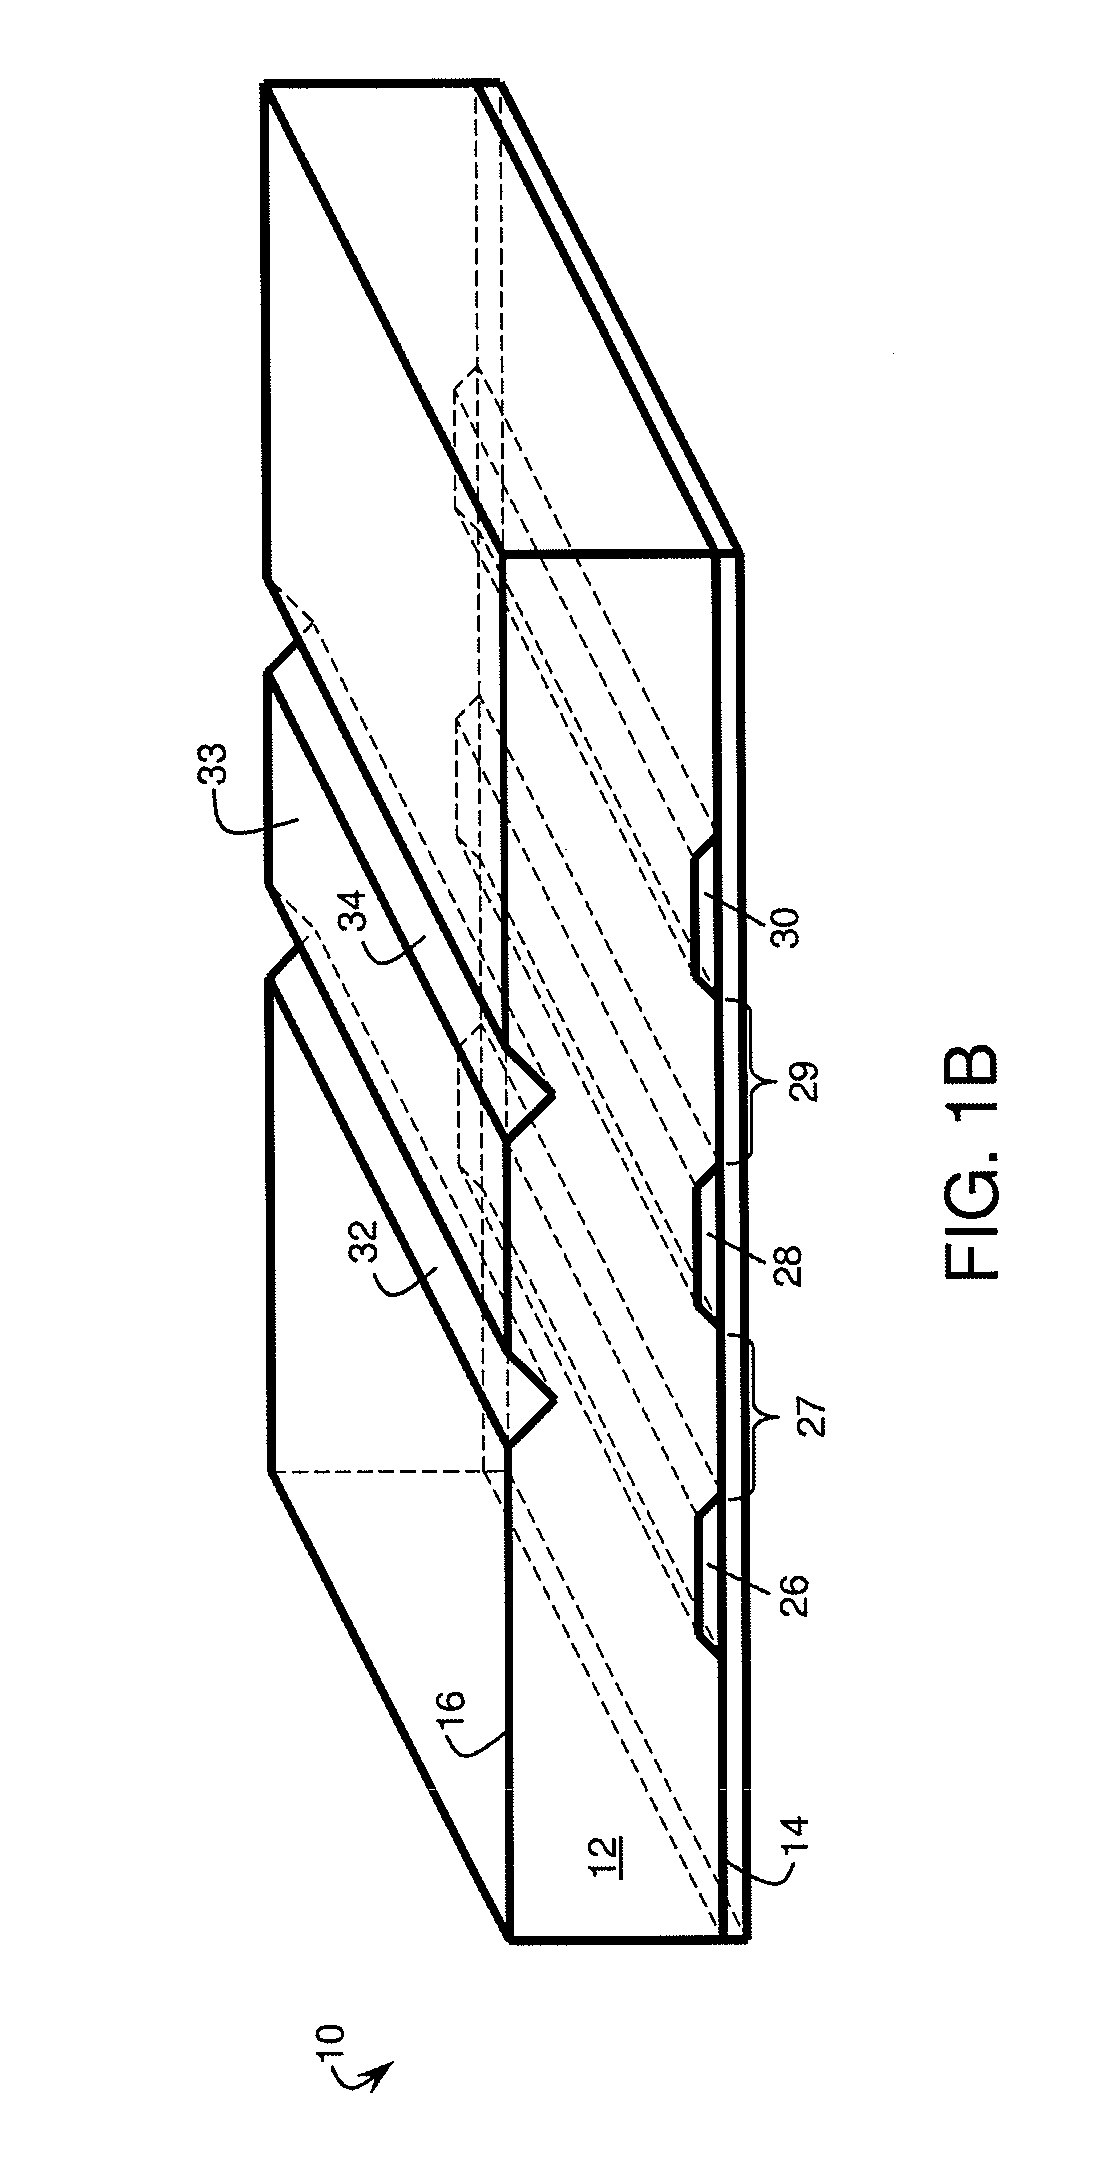 Structures for controlling light interaction with microfluidic devices